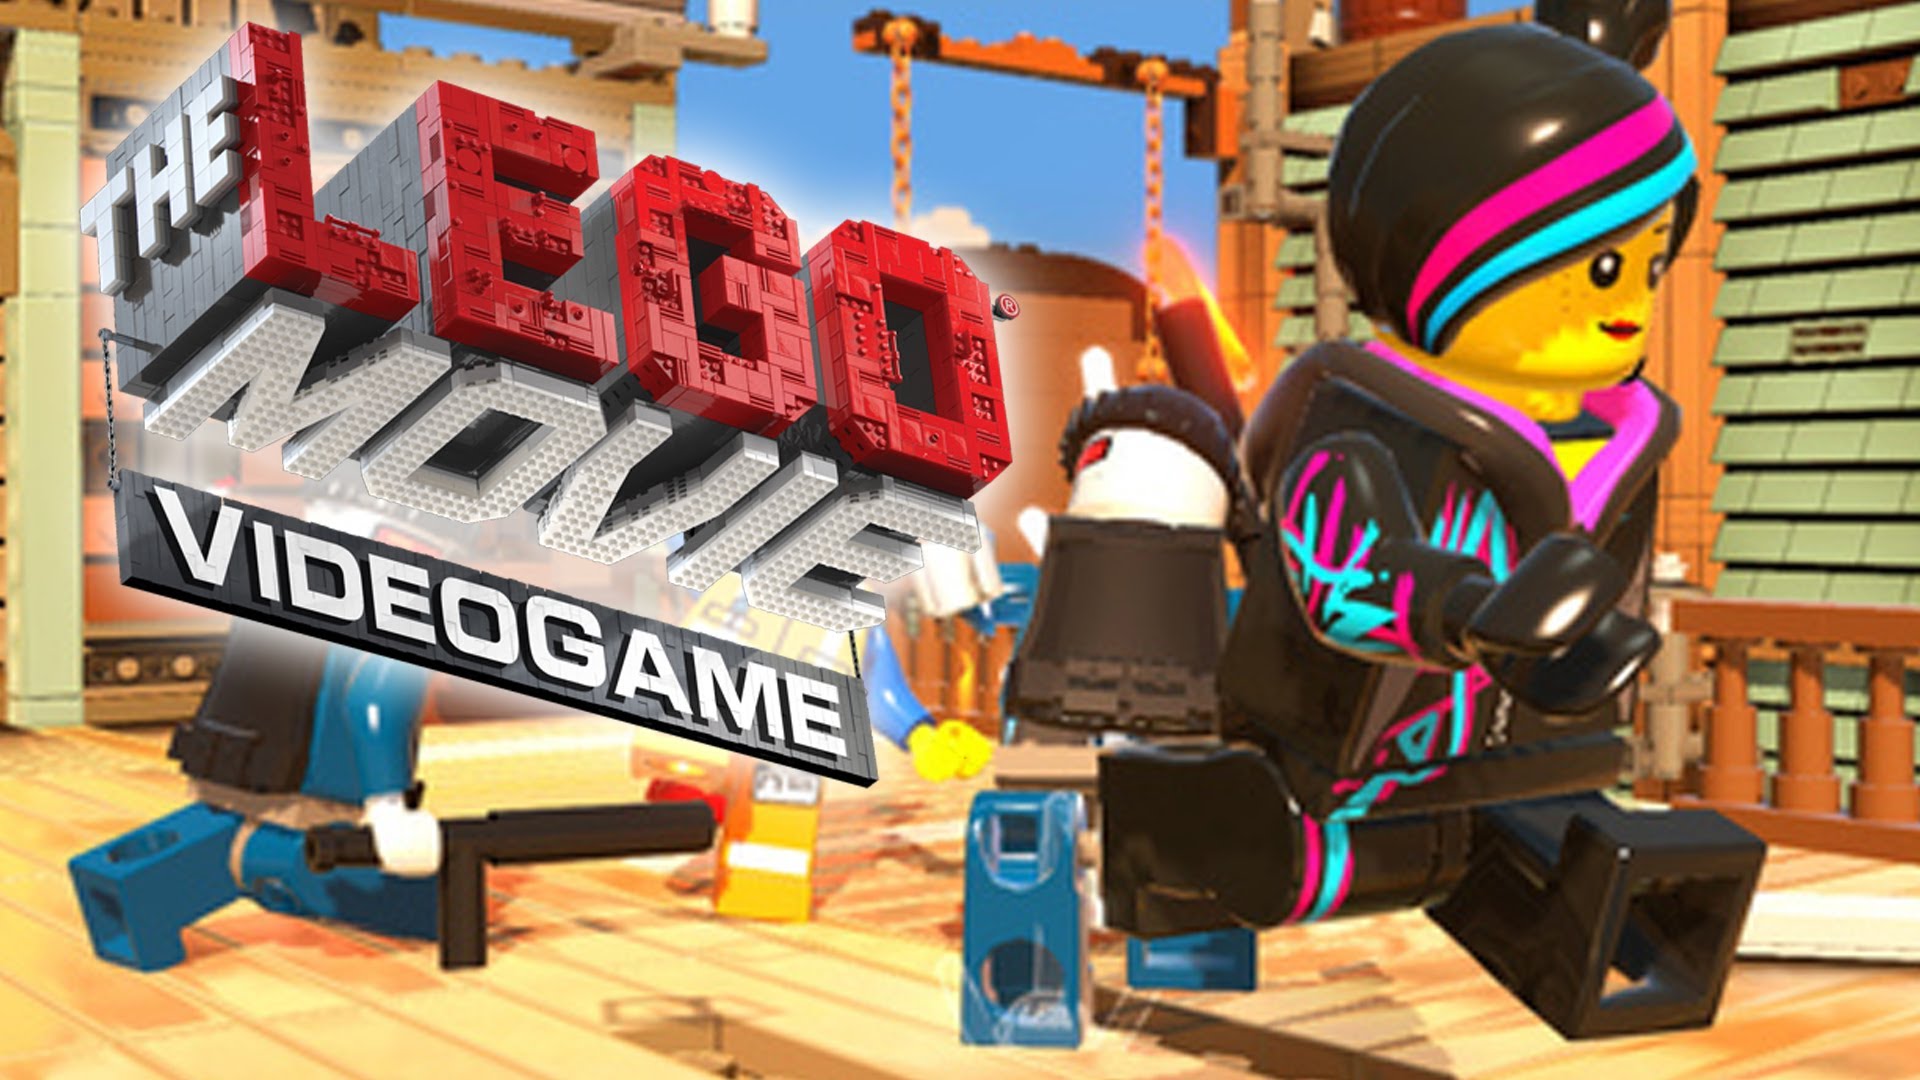 The LEGO Movie Videogame #22